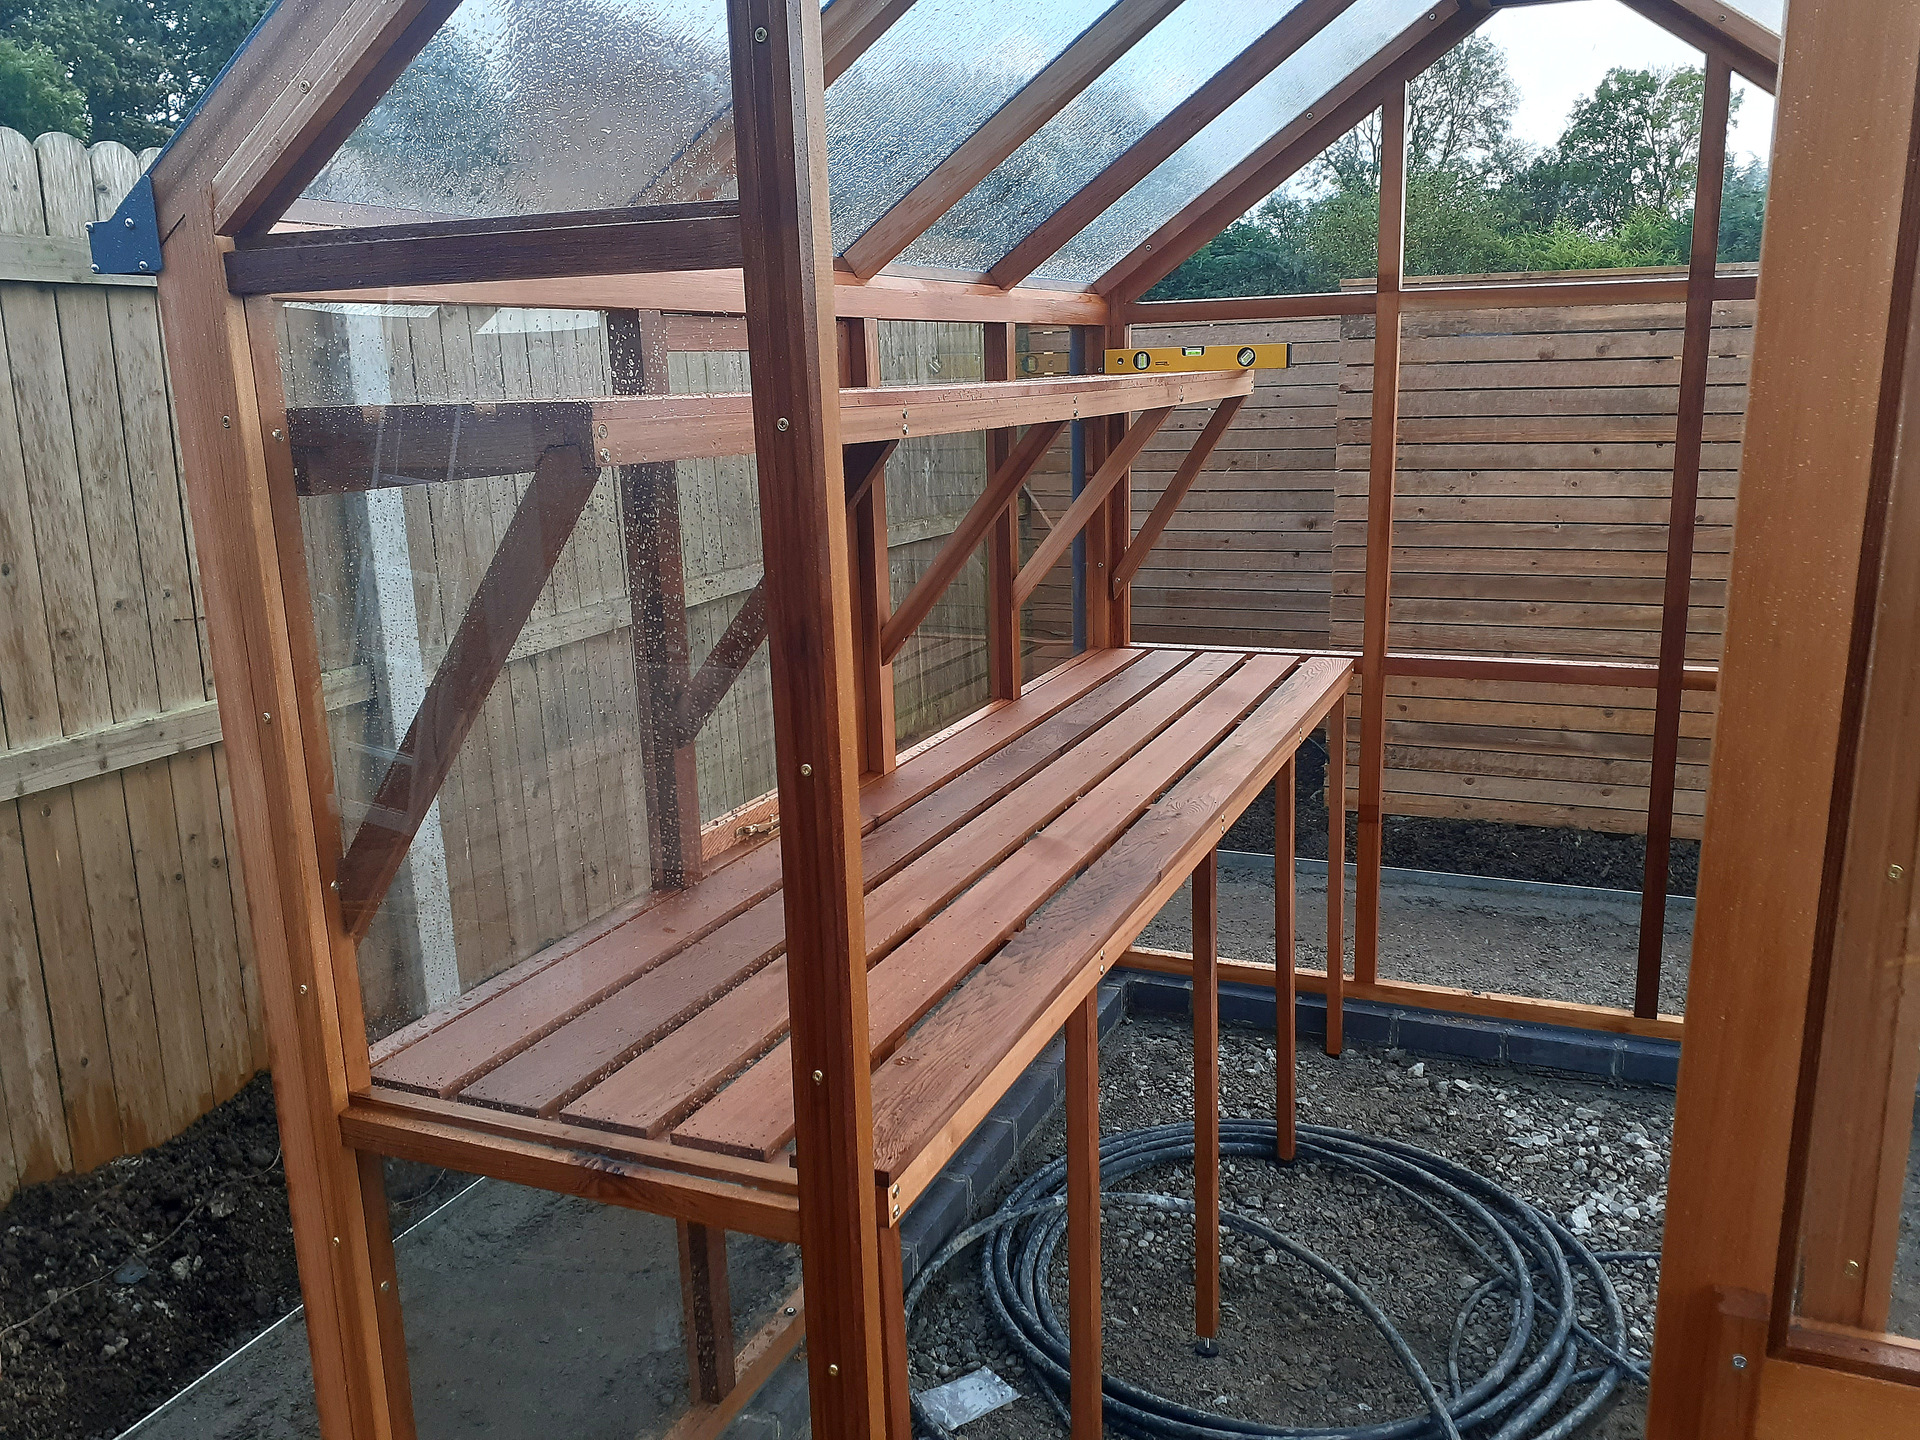 Cedar Staging & Shelving, essential optional accessories for the superbly crafted Classic Six Cedar Timber Greenhouse | Supplied + Fitted in Maynooth, Co Kildare by Owen Chubb Garden Landscapers, Tel 087-2306 128